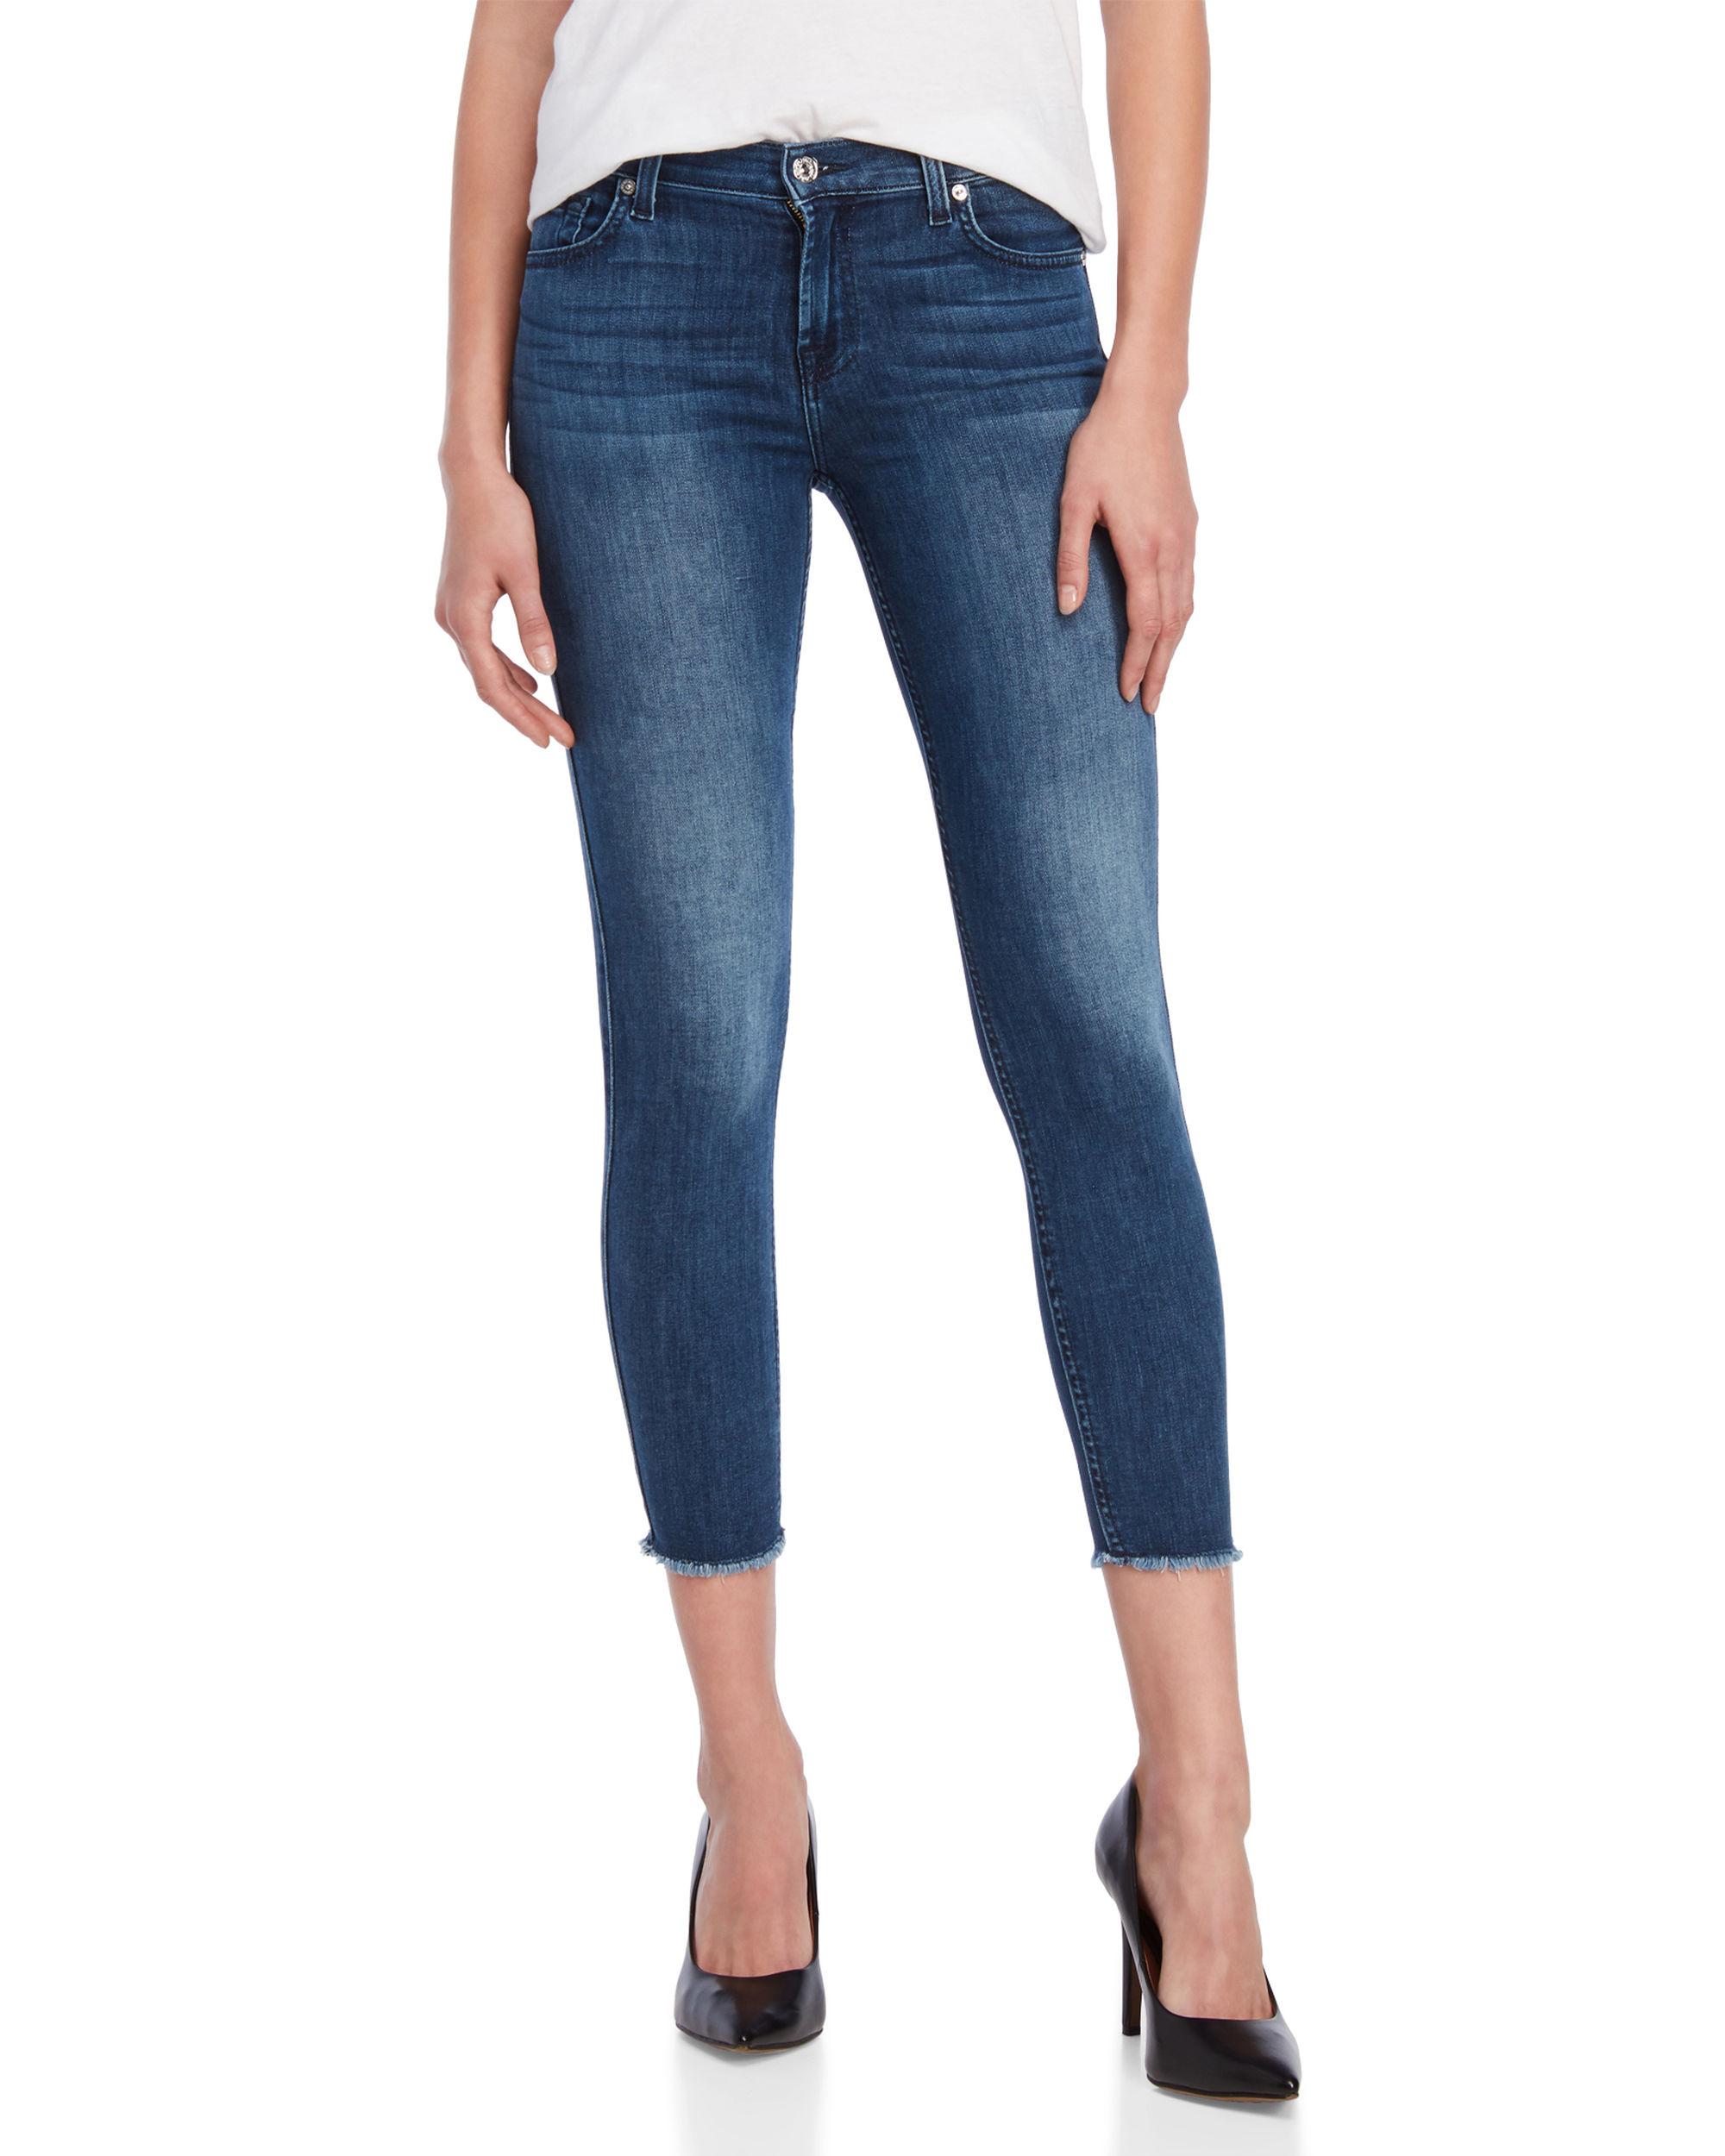 7 For All Mankind Denim Gwenevere Frayed Hem Ankle Jeans in Blue - Lyst